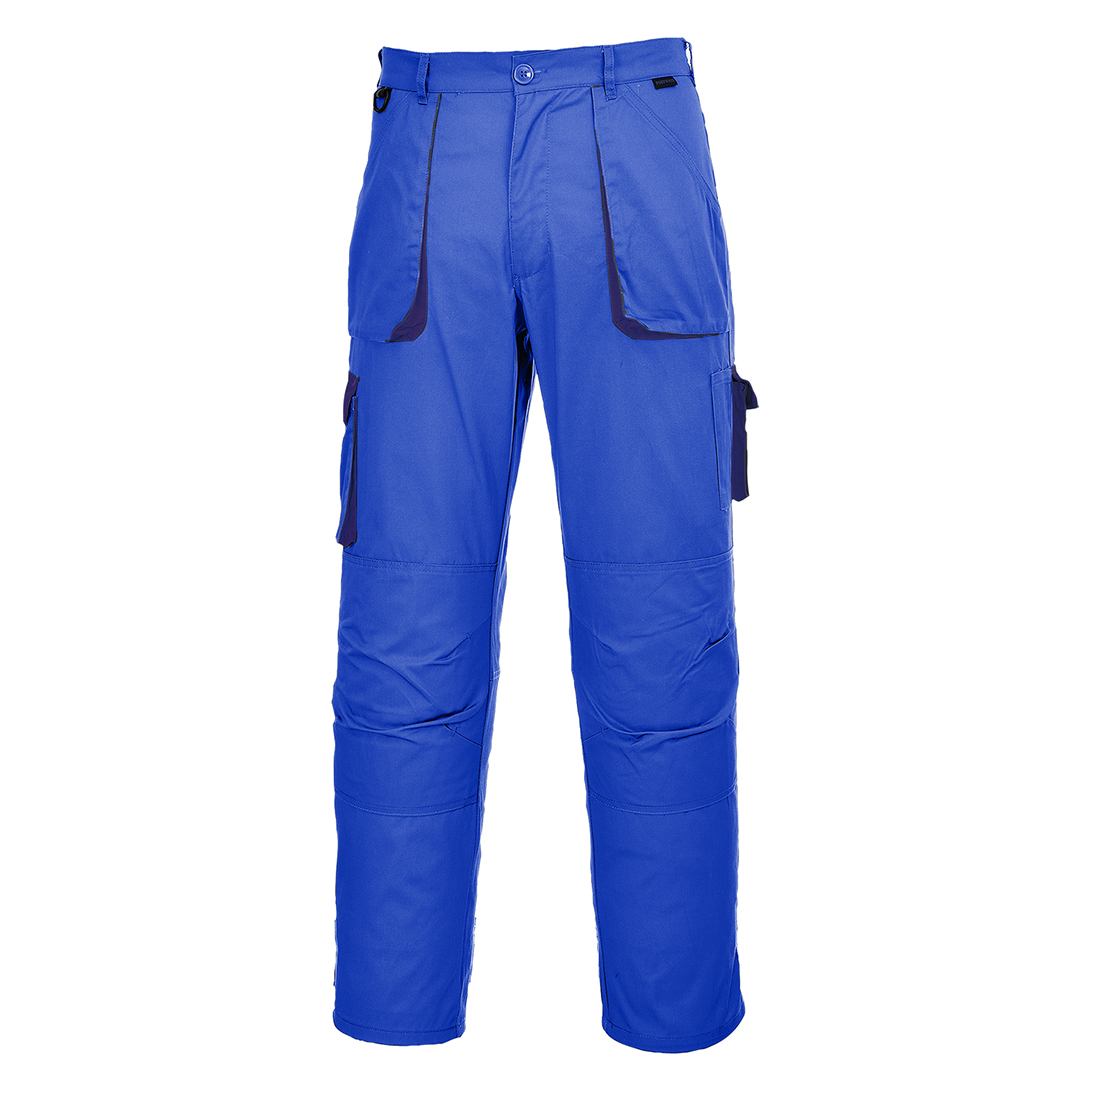 Portwest Texo Contrast Trouser - Royal Blue Tall